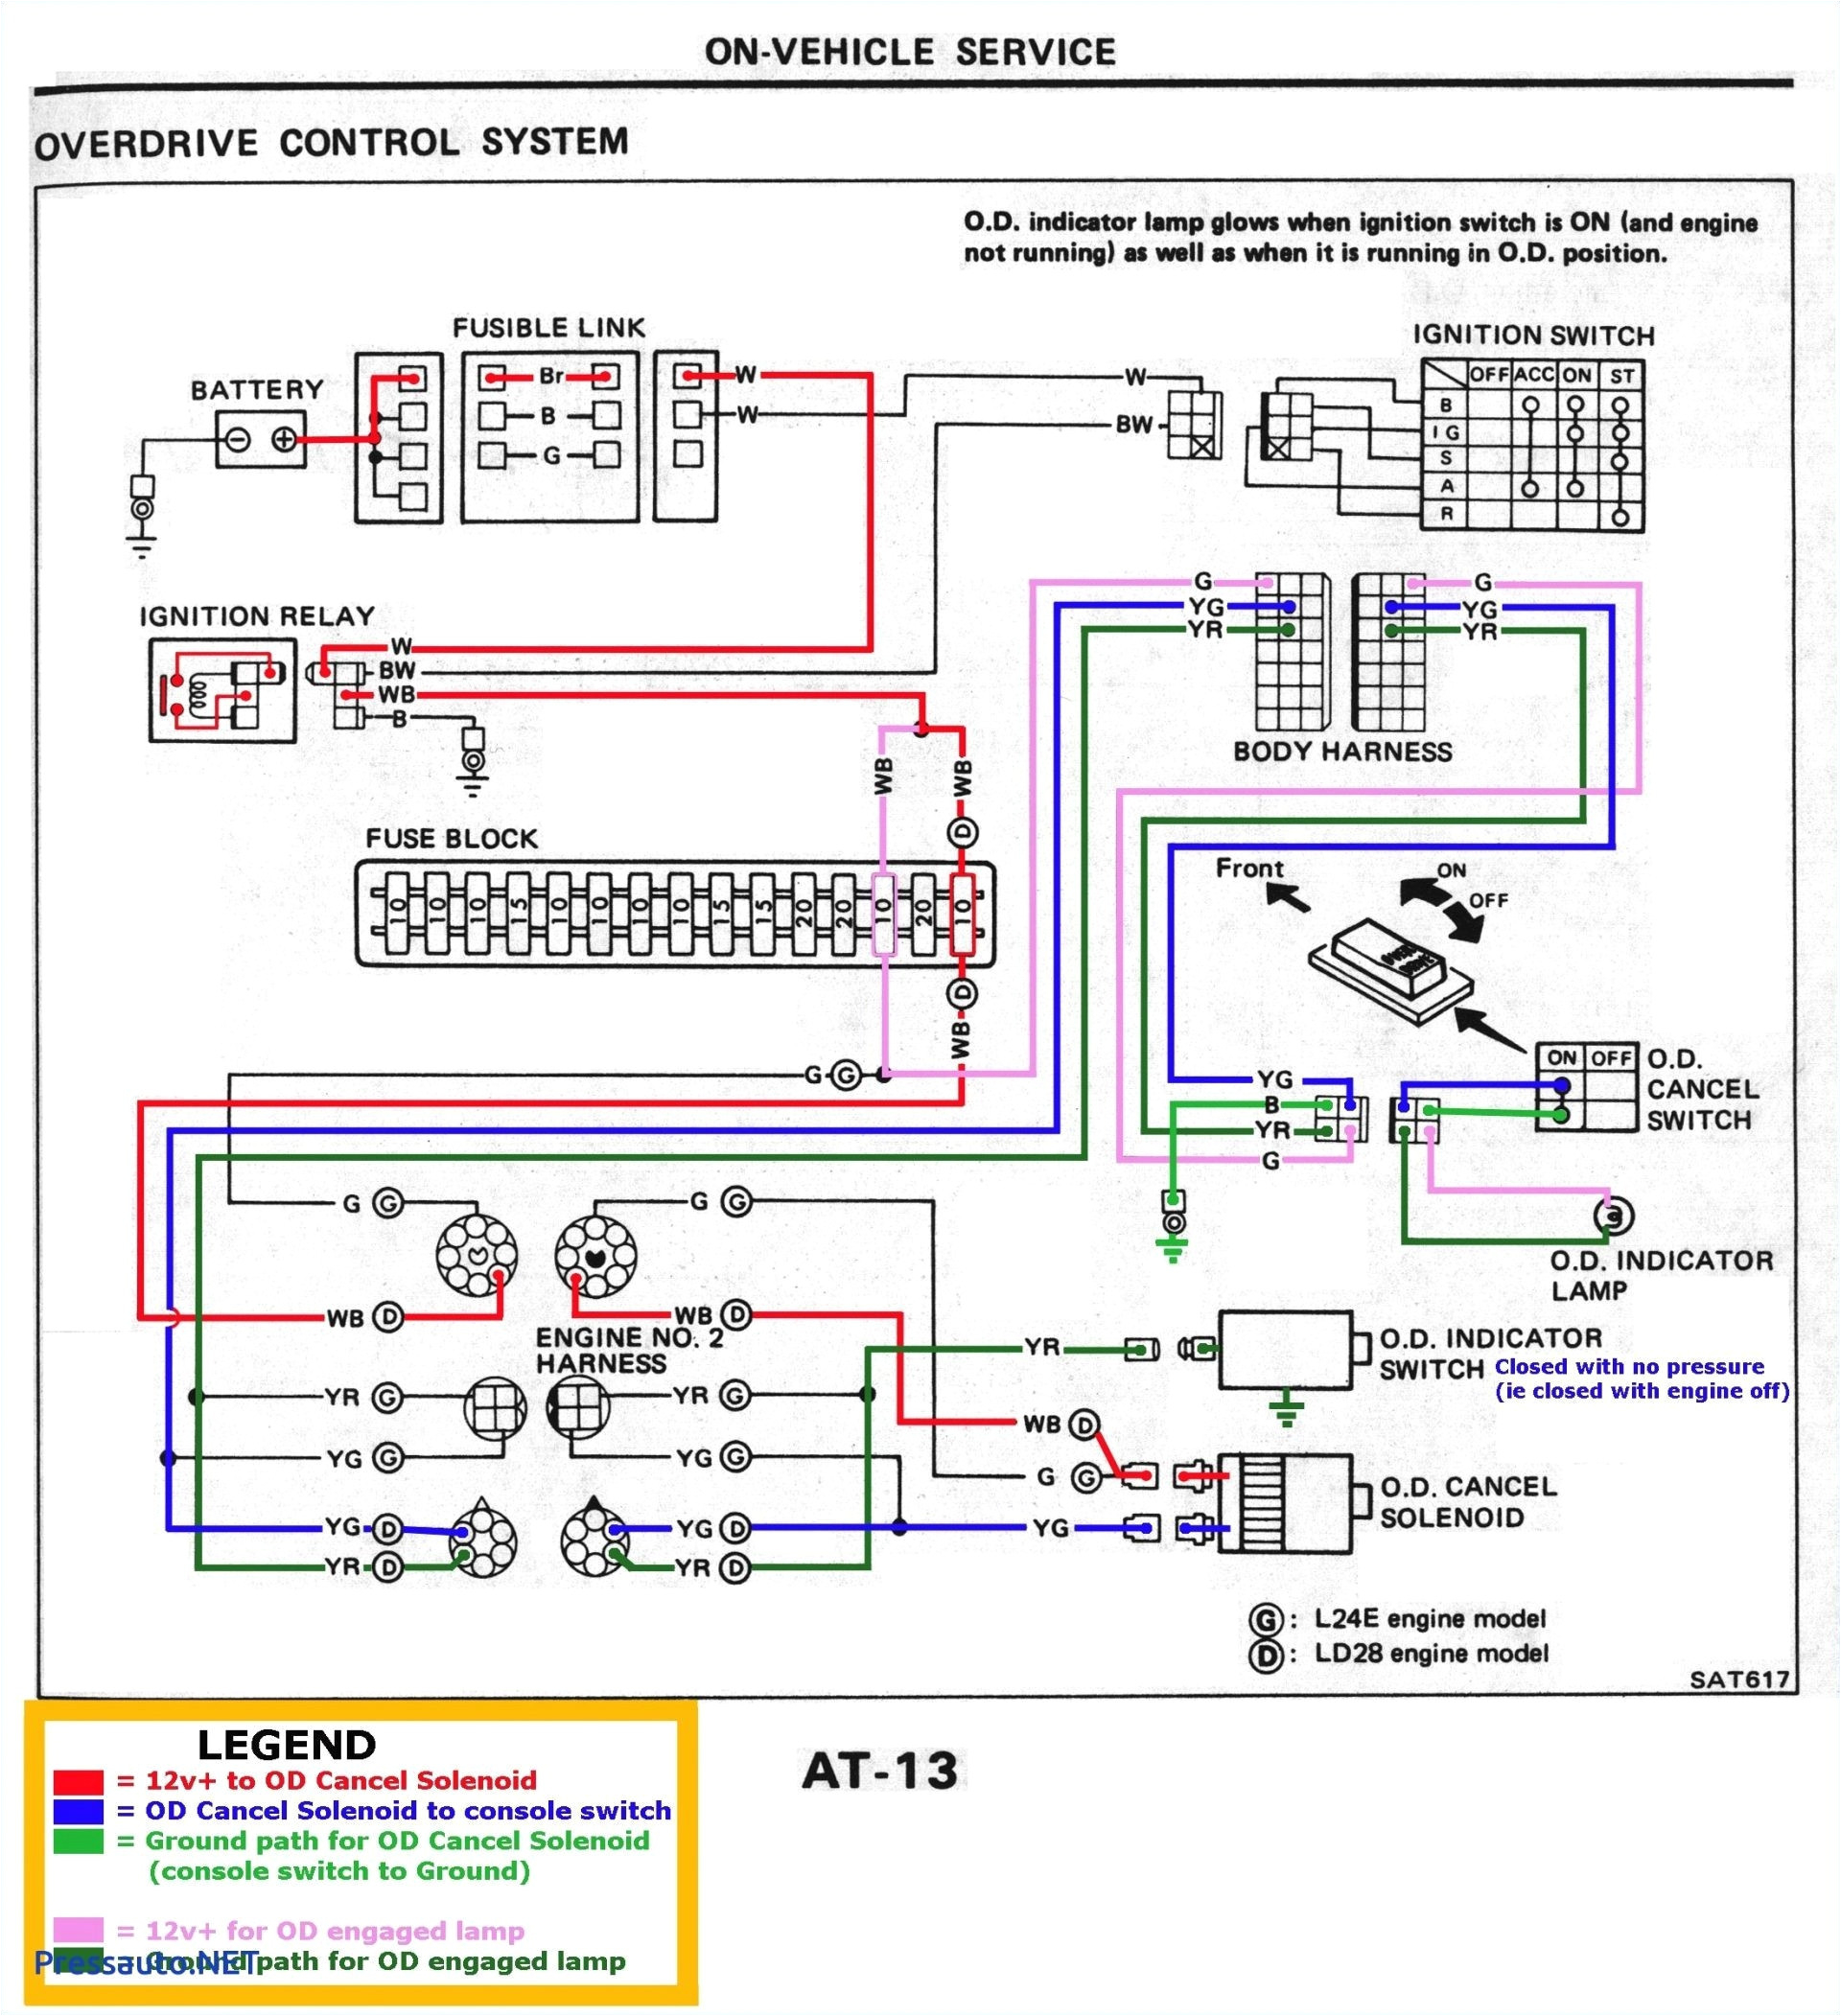 how to wire an isolator switch wiring diagram best of how to wire an isolator switch wiring diagram new 4 wire light jpg